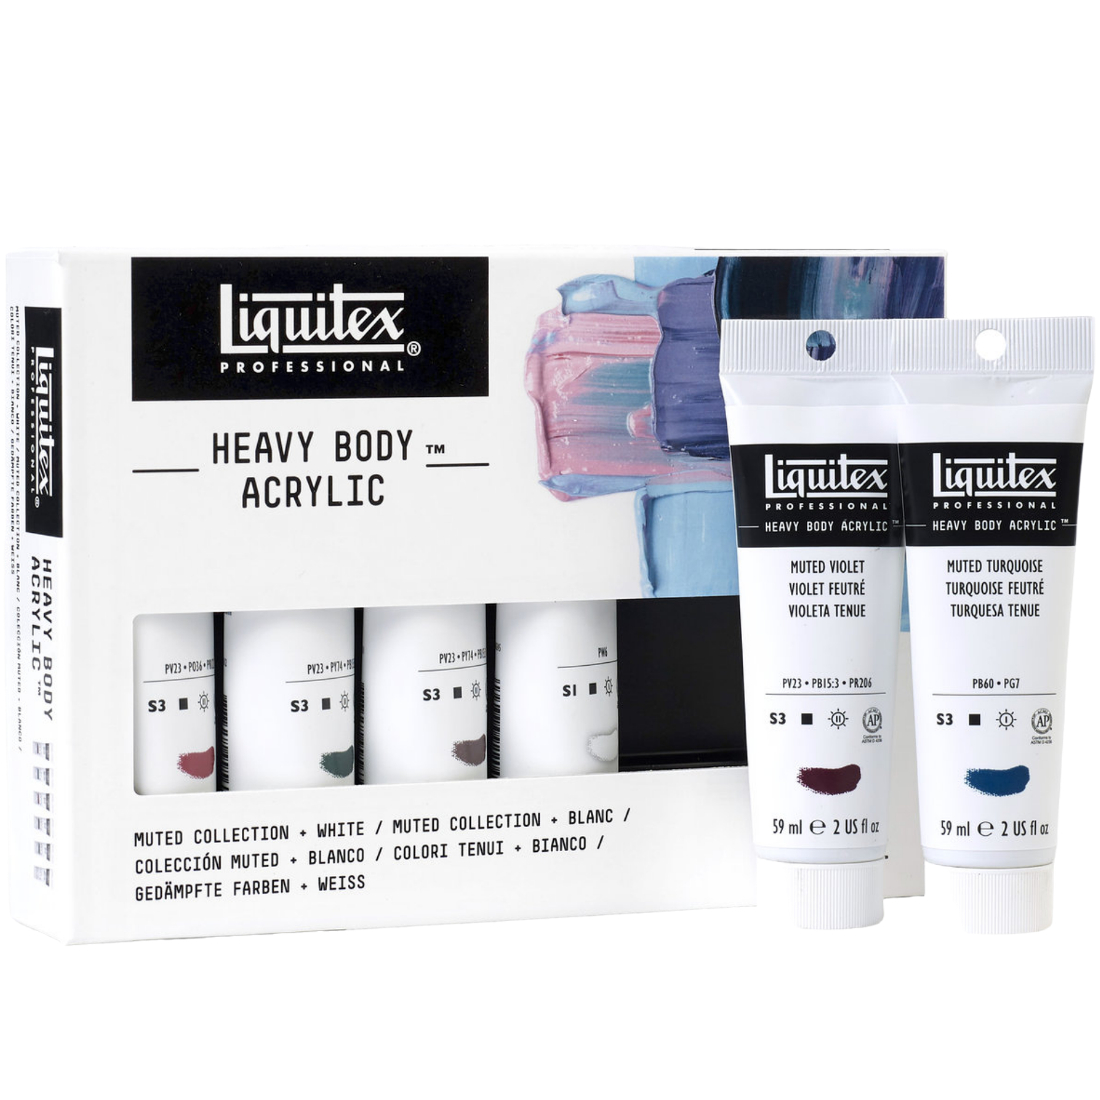 Acrílico Heavy Body Profissional Muted Collection liquitex